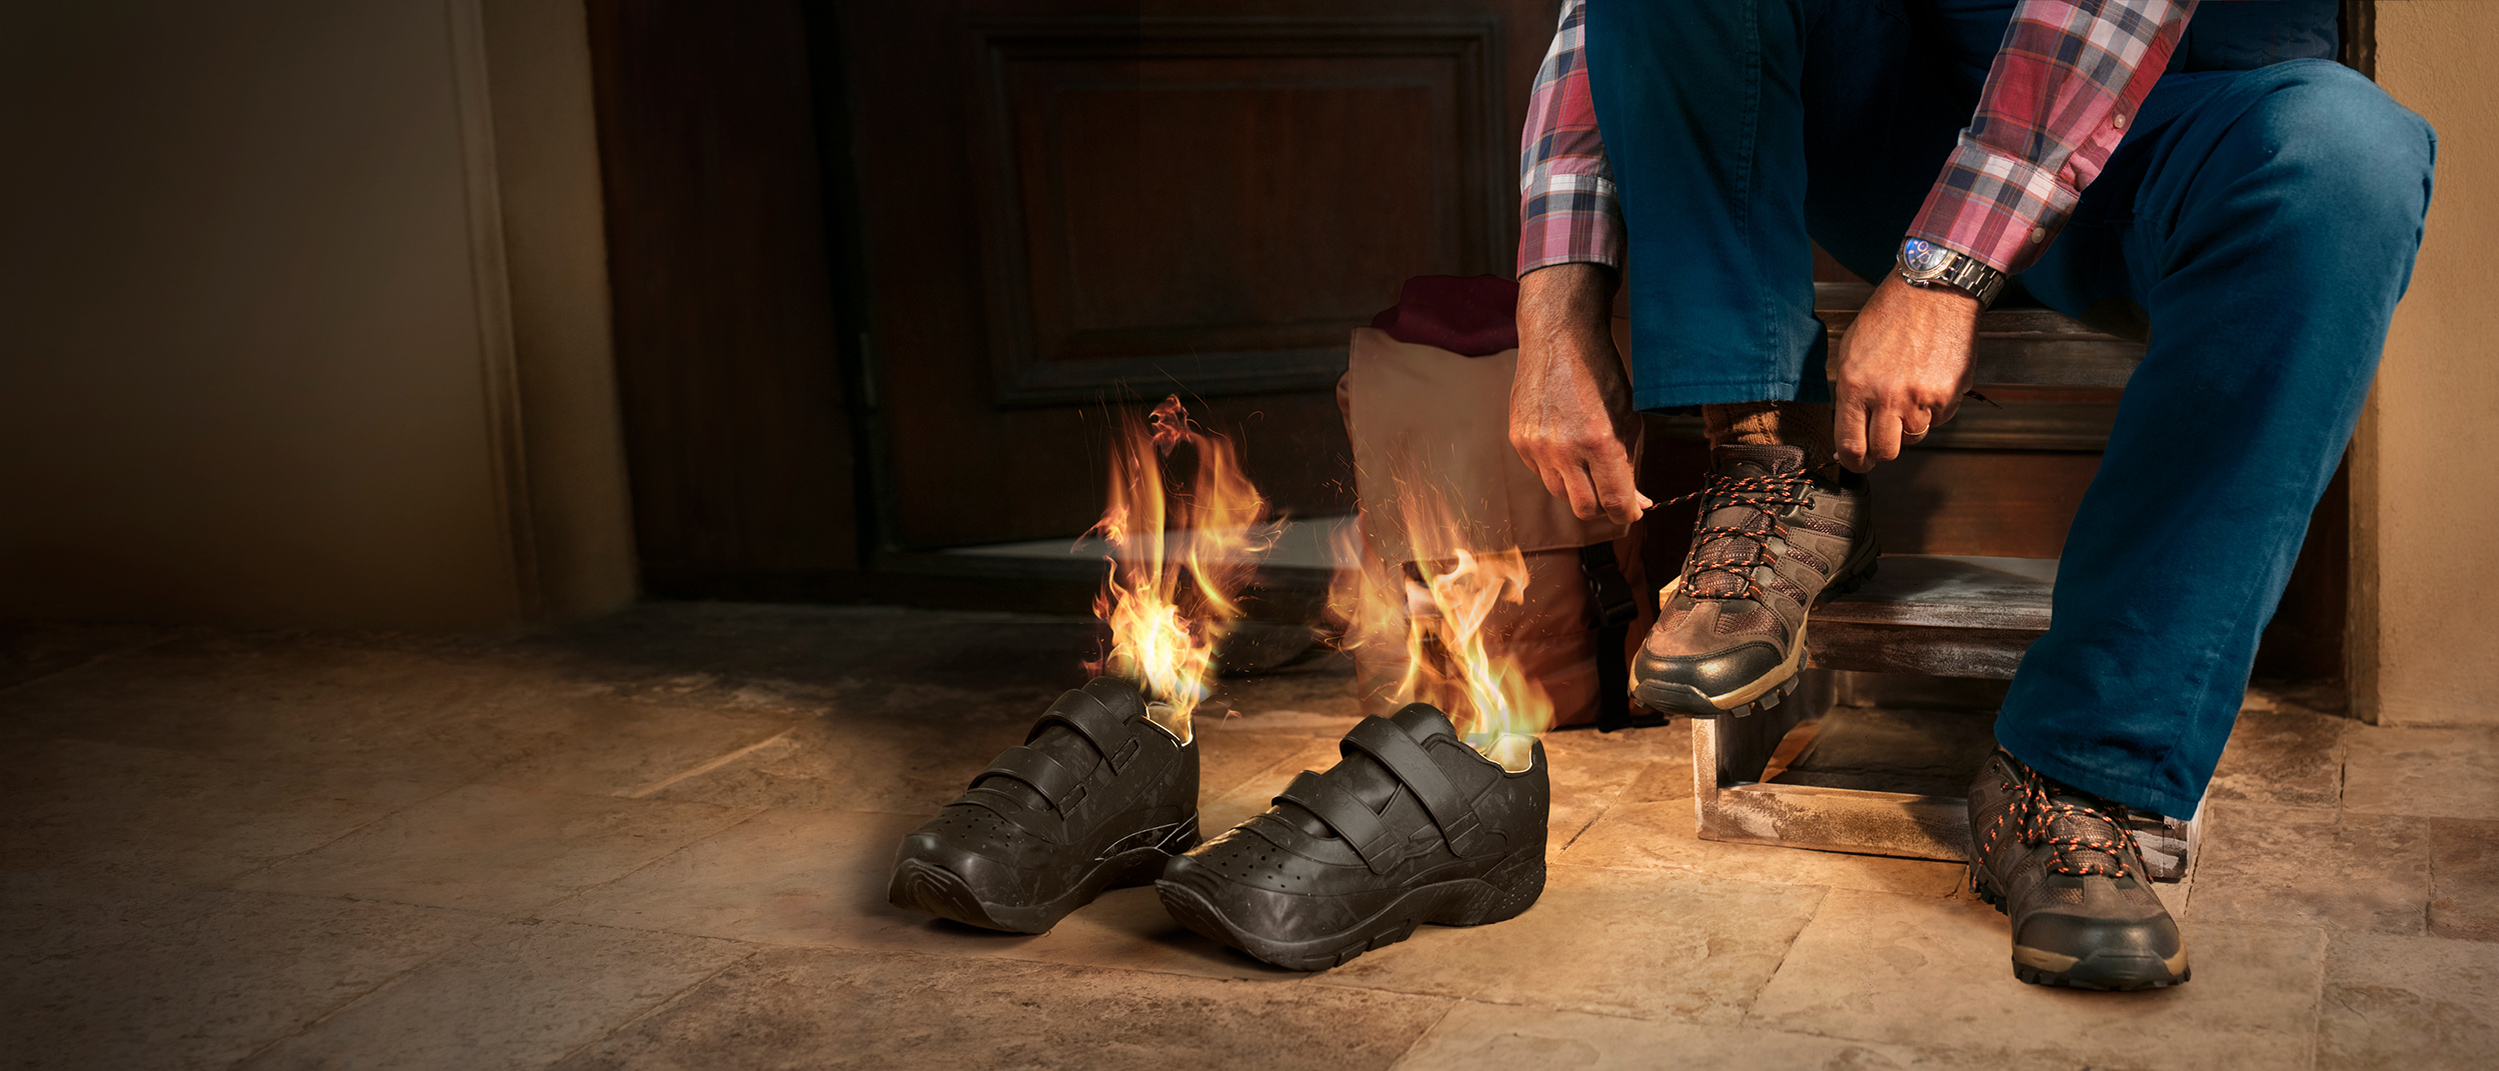 Illustration of a person on front steps of their house putting shoes on in preparation for a hike as the inside of shoes next to him are on fire